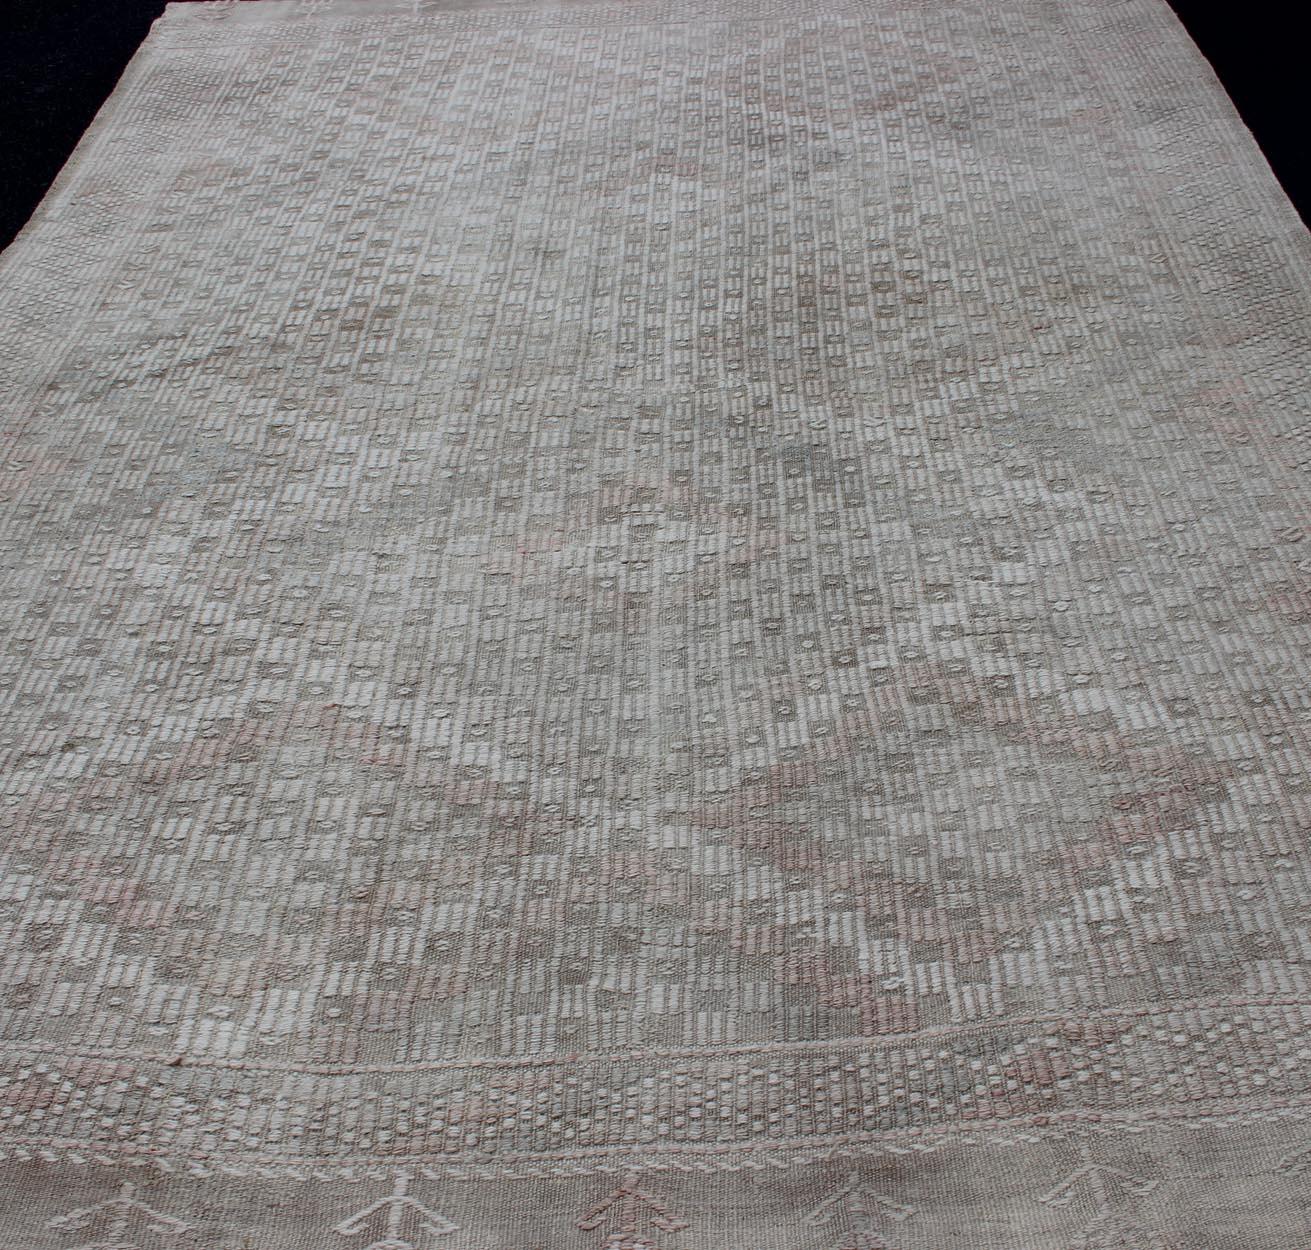 20th Century Vintage Turkish Embroidered Rug with Geometric Diamond Design in Neutral Tones For Sale